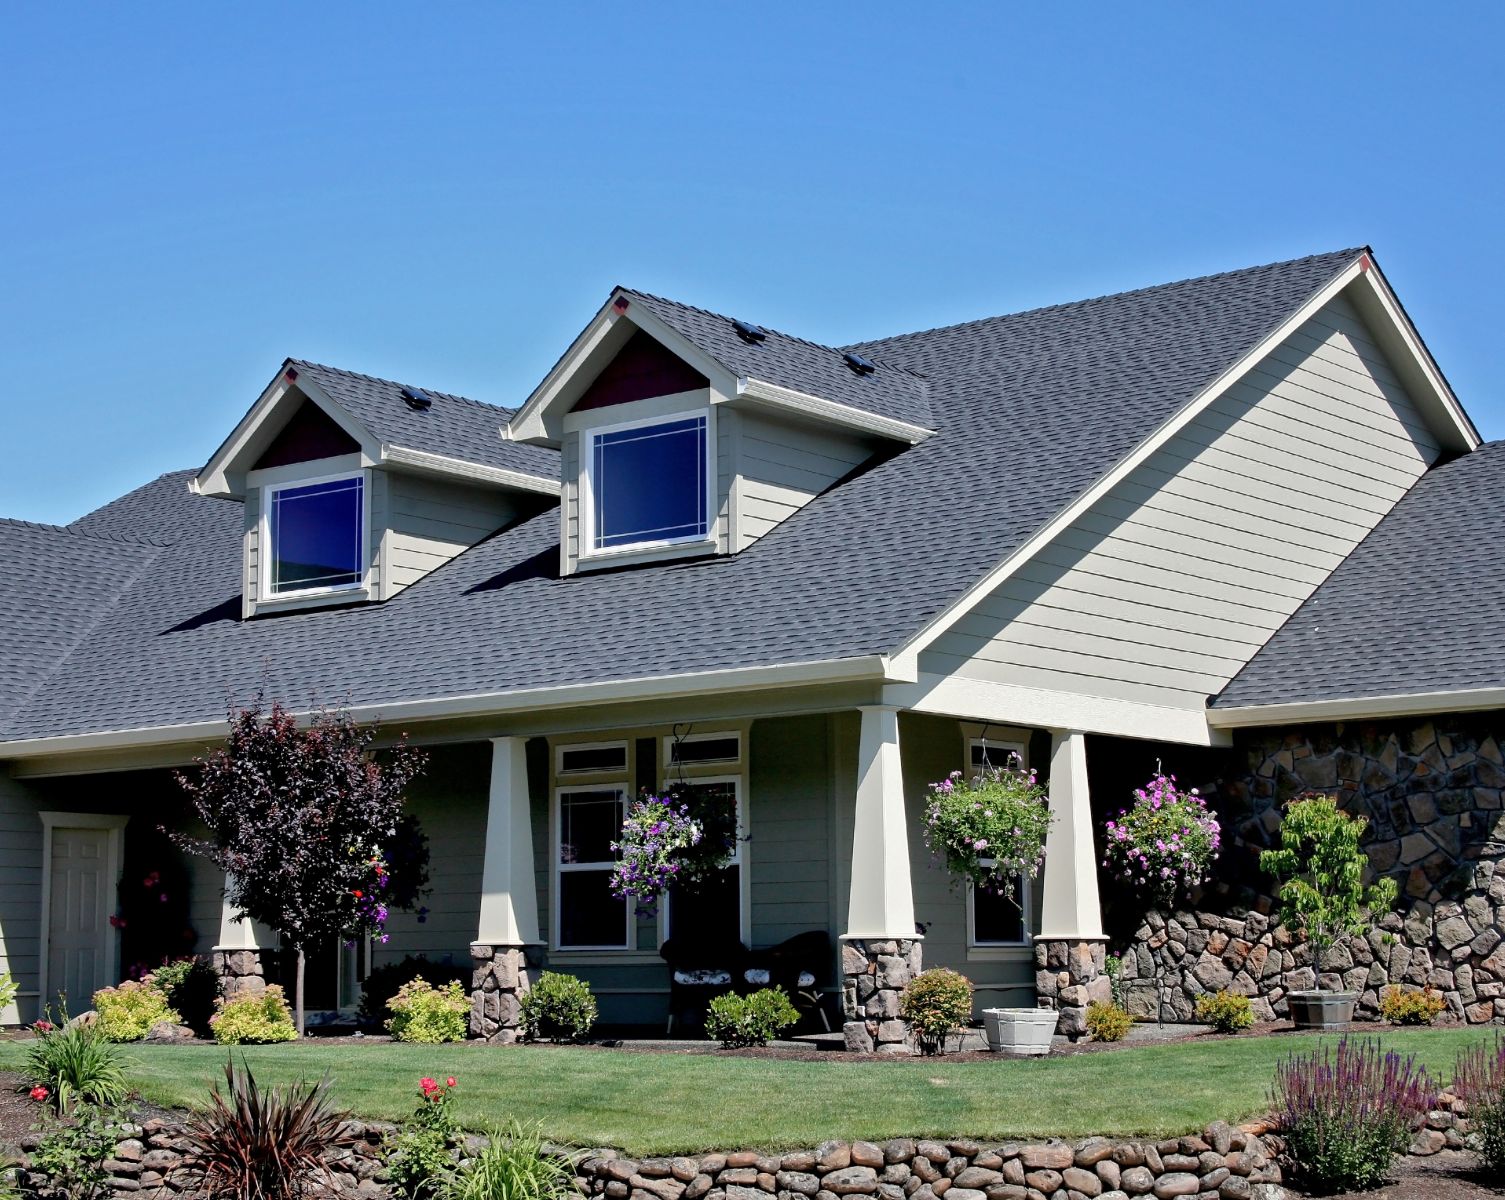 10 Essential Tips for a Successful Roof Replacement